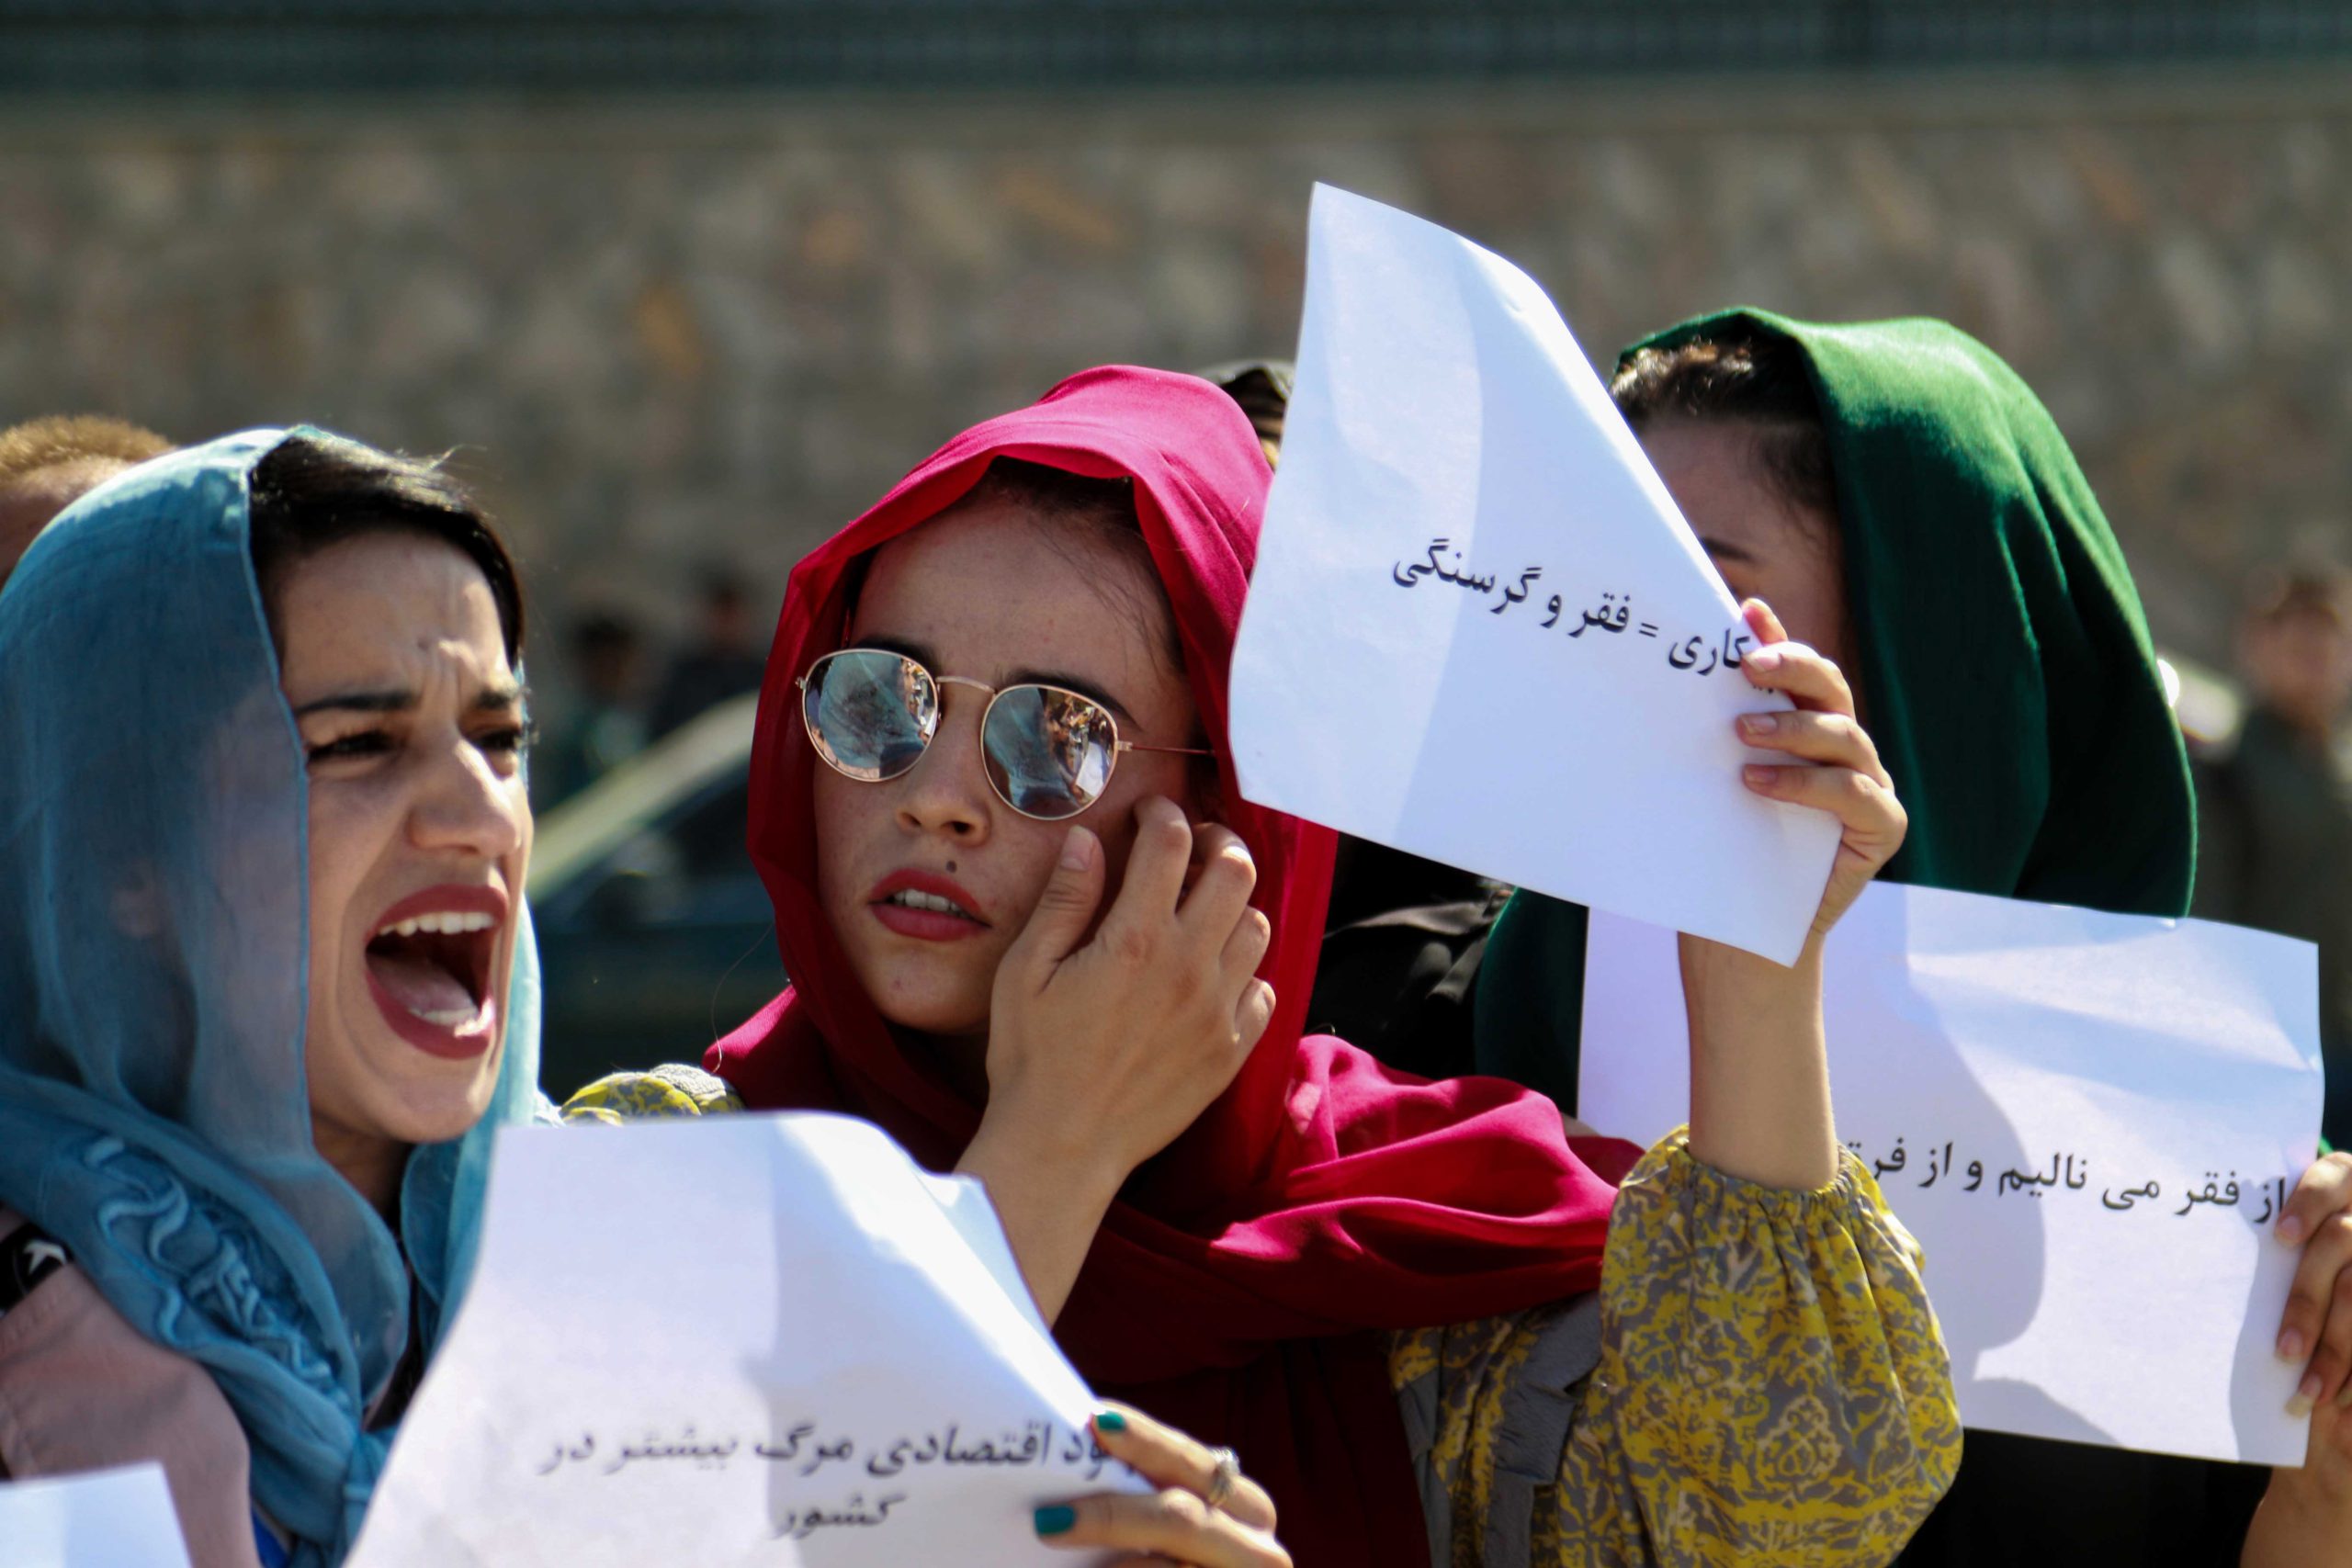 epa09535737 Afghan women shout slogans during a protest to demand that the Taliban government allow the reopening of girls schools and to provide ample employment opportunities, in Kabul, Afghanistan, 21 October 2021. The Taliban promised on 18 October 2021, that they would soon allow all girls to return to school, after not allowing them to access to education in secondary schools following their reopening a month ago. The ban on reopening schools for girls and young people has caused uncertainty among the Afghan people, with criticism from women's rights activists who fear returning to the dark era under the former Taliban regime between 1996 and 2001.  EPA/STRINGER